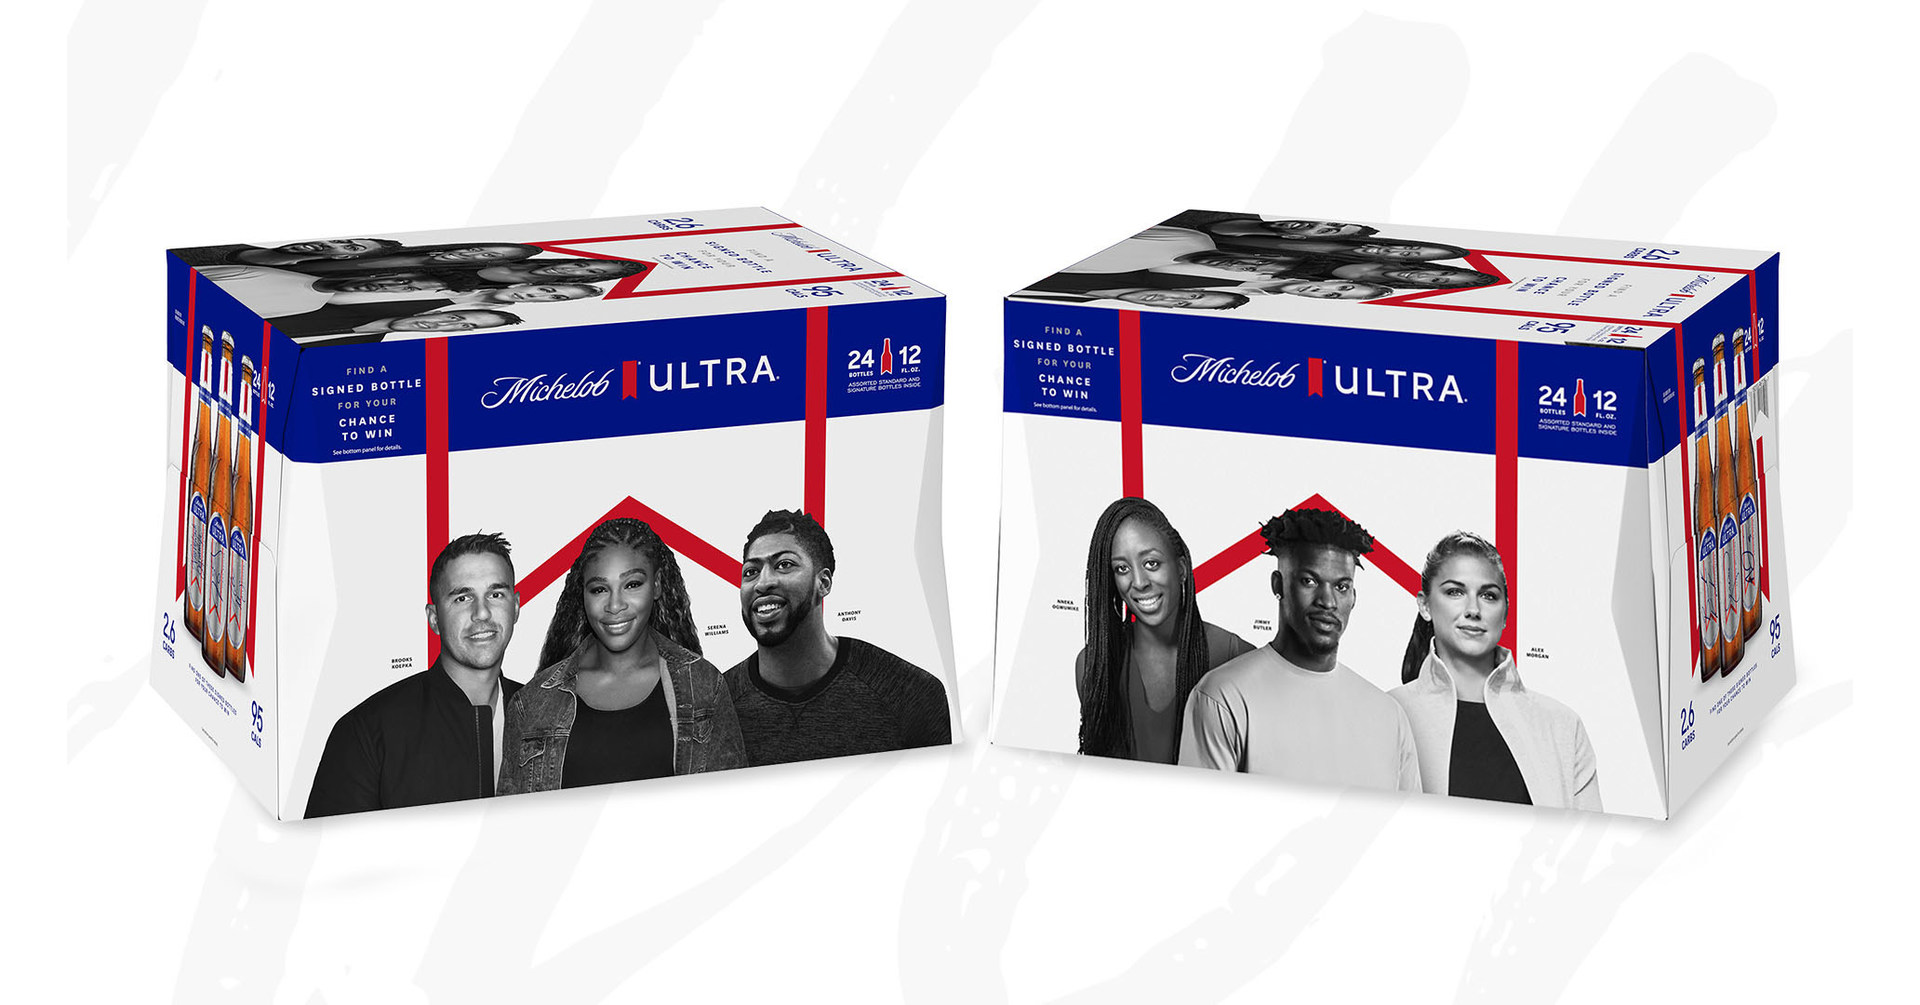 Michelob ULTRA Teams Up with NBA JAM to Bring '90s Nostalgia to